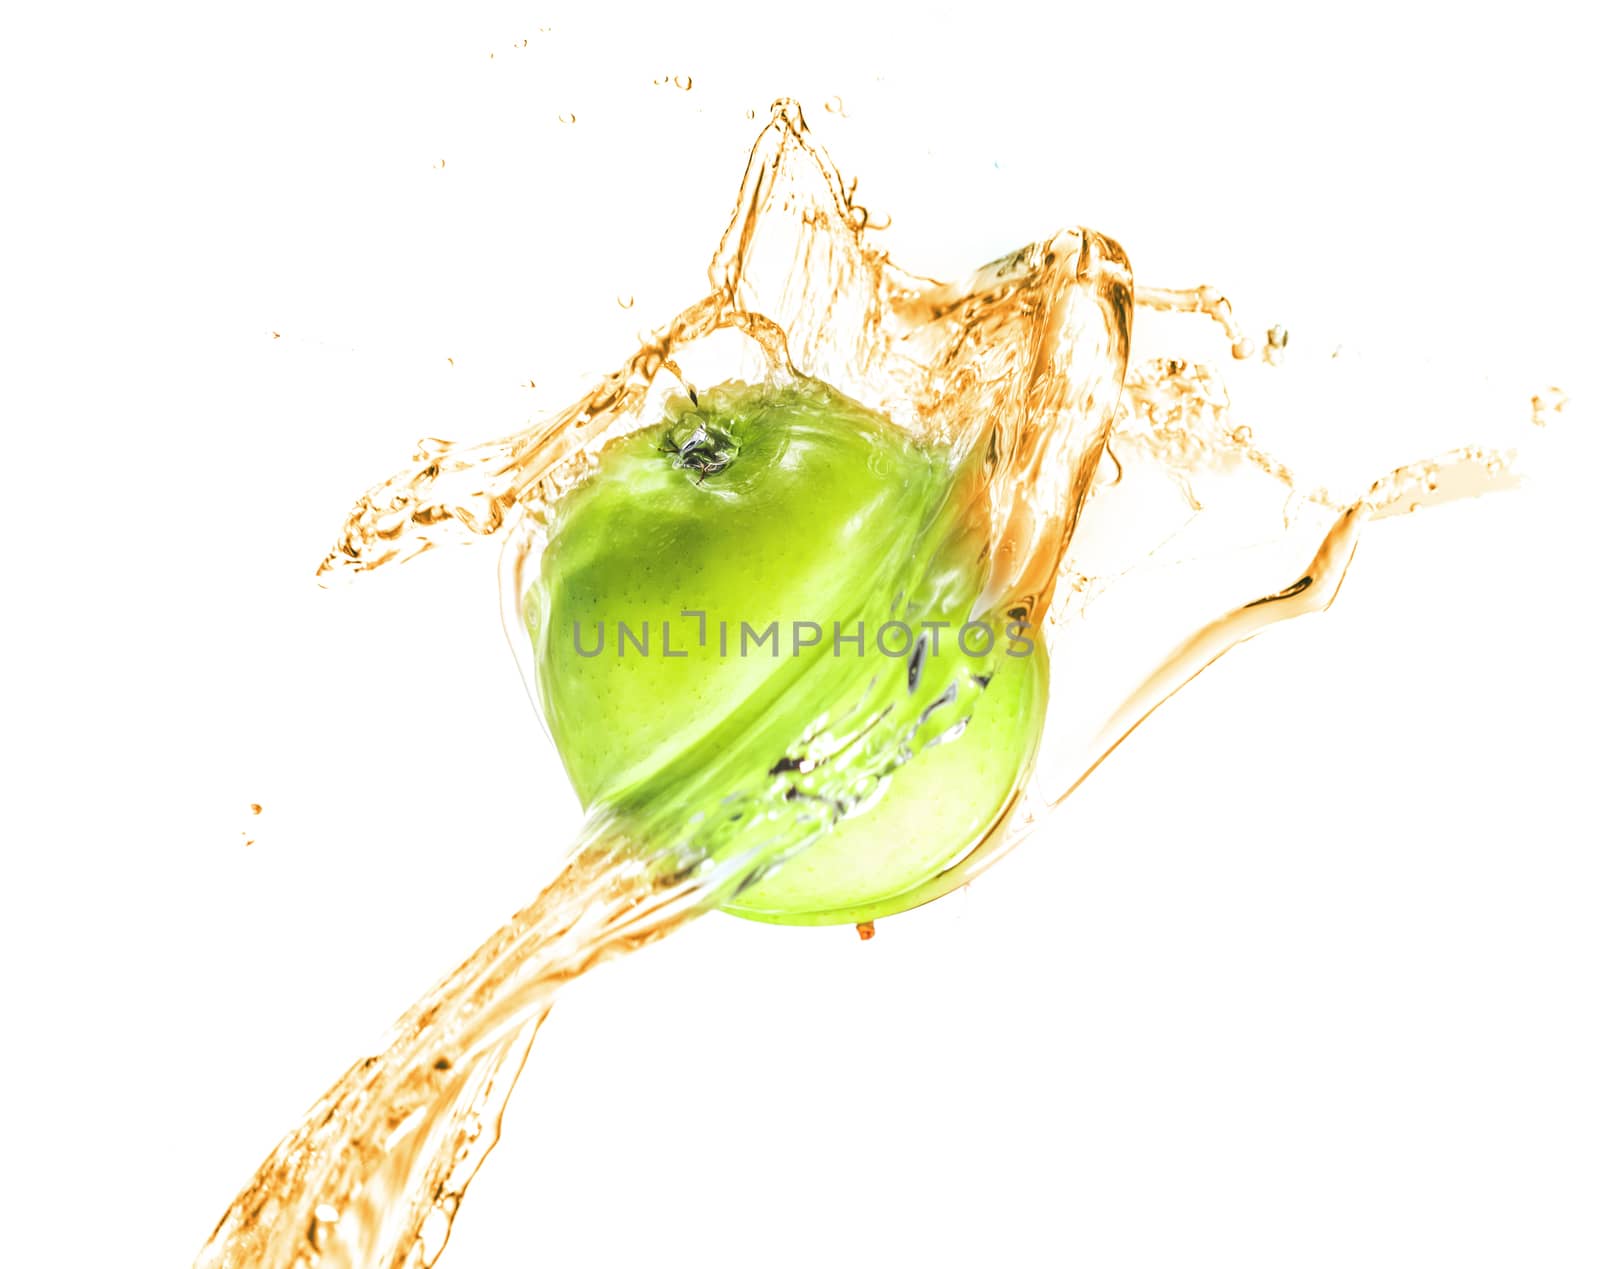 Green apple with water splash, isolated on white background